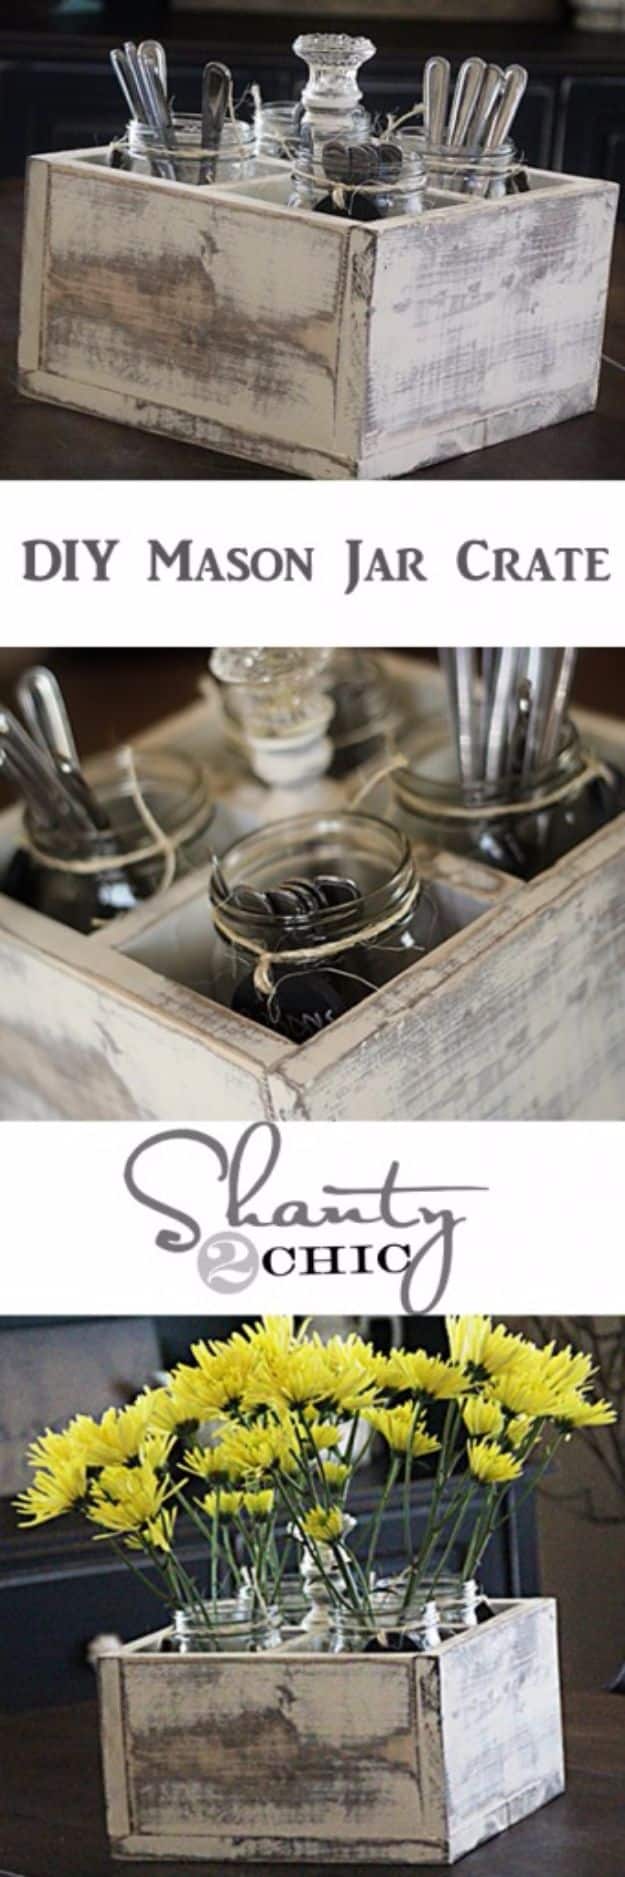 Country Crafts to Make And Sell - DIY Mason Jar Crate - Easy DIY Home Decor and Rustic Craft Ideas - Step by Step Farmhouse Decor To Make and Sell on Etsy and at Craft Fairs - Tutorials and Instructions for Creative Ways to Make Money - Best Vintage Farmhouse DIY For Living Room, Bedroom, Walls and Gifts #craftstosell #countrycrafts #etsyideas